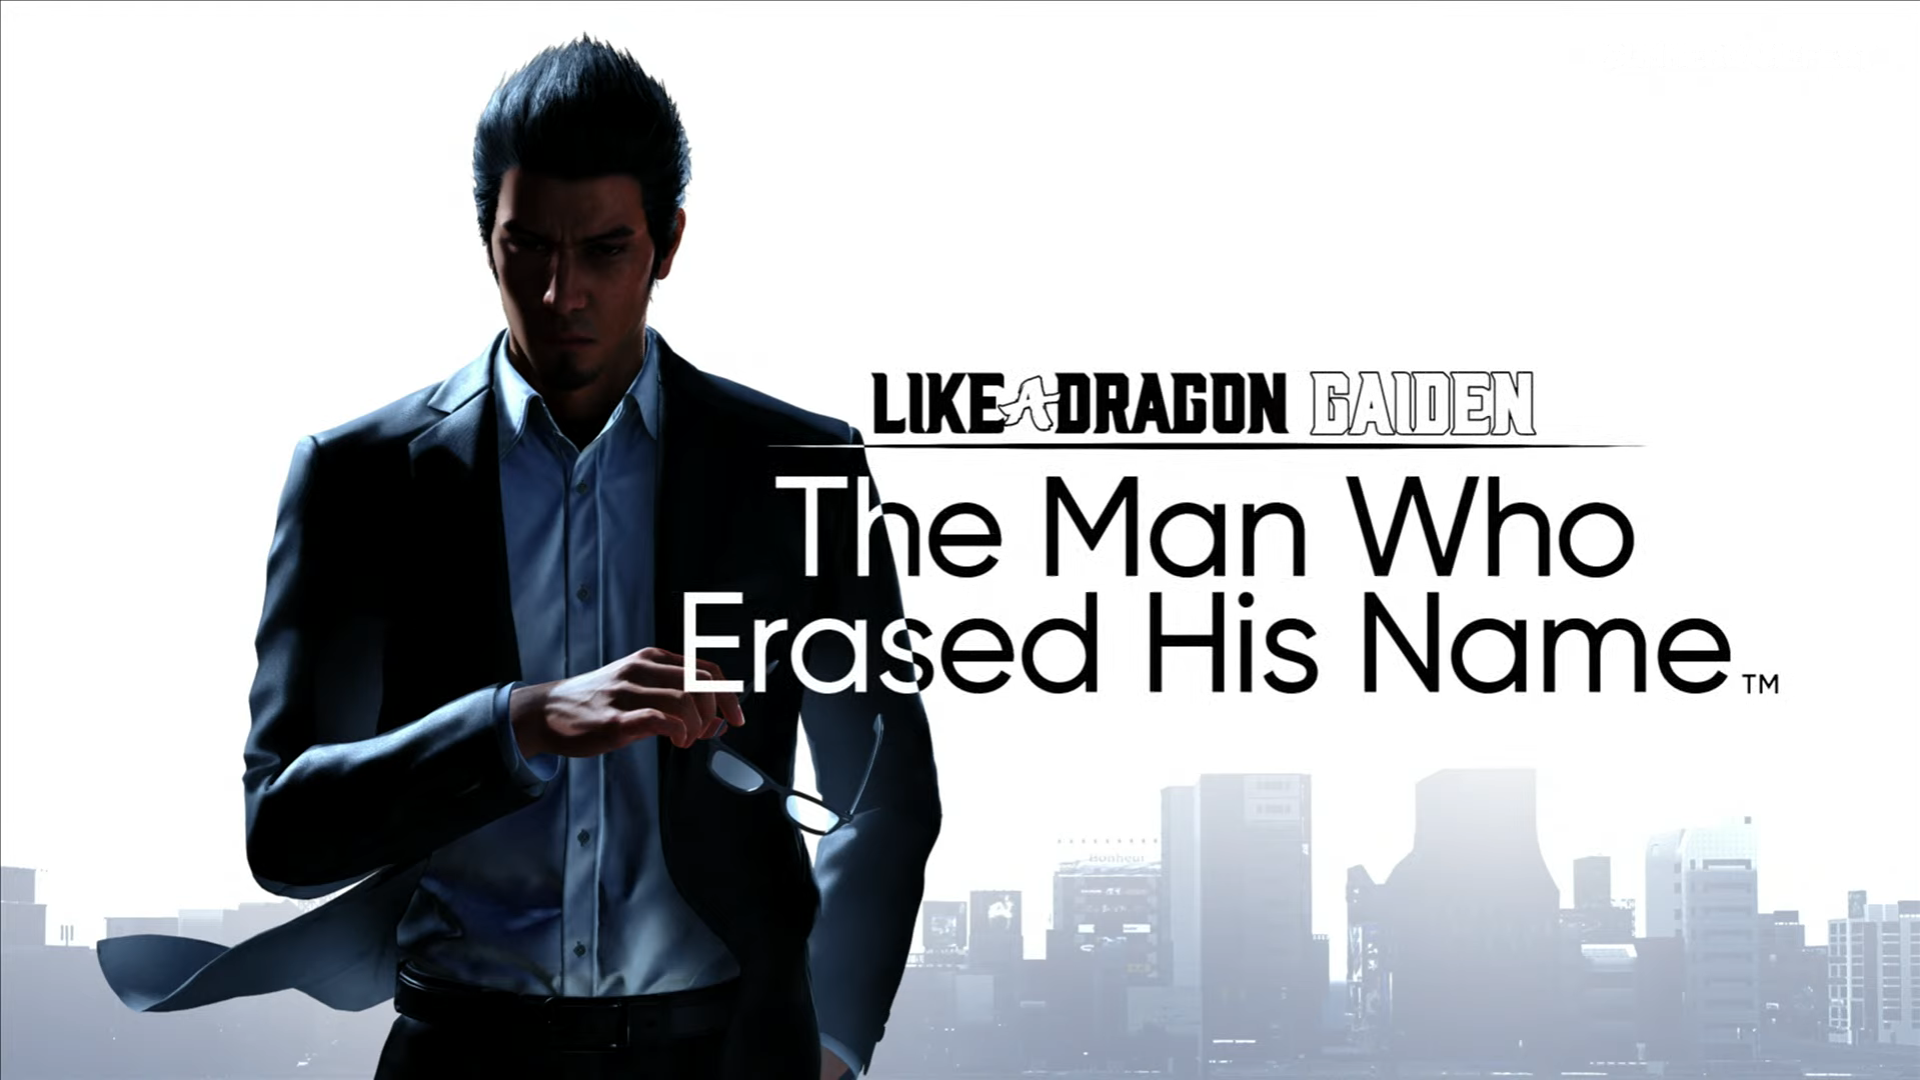 Like A Dragon Gaiden: The Man Who Erased His Name Reveals Character Profiles & Story Details